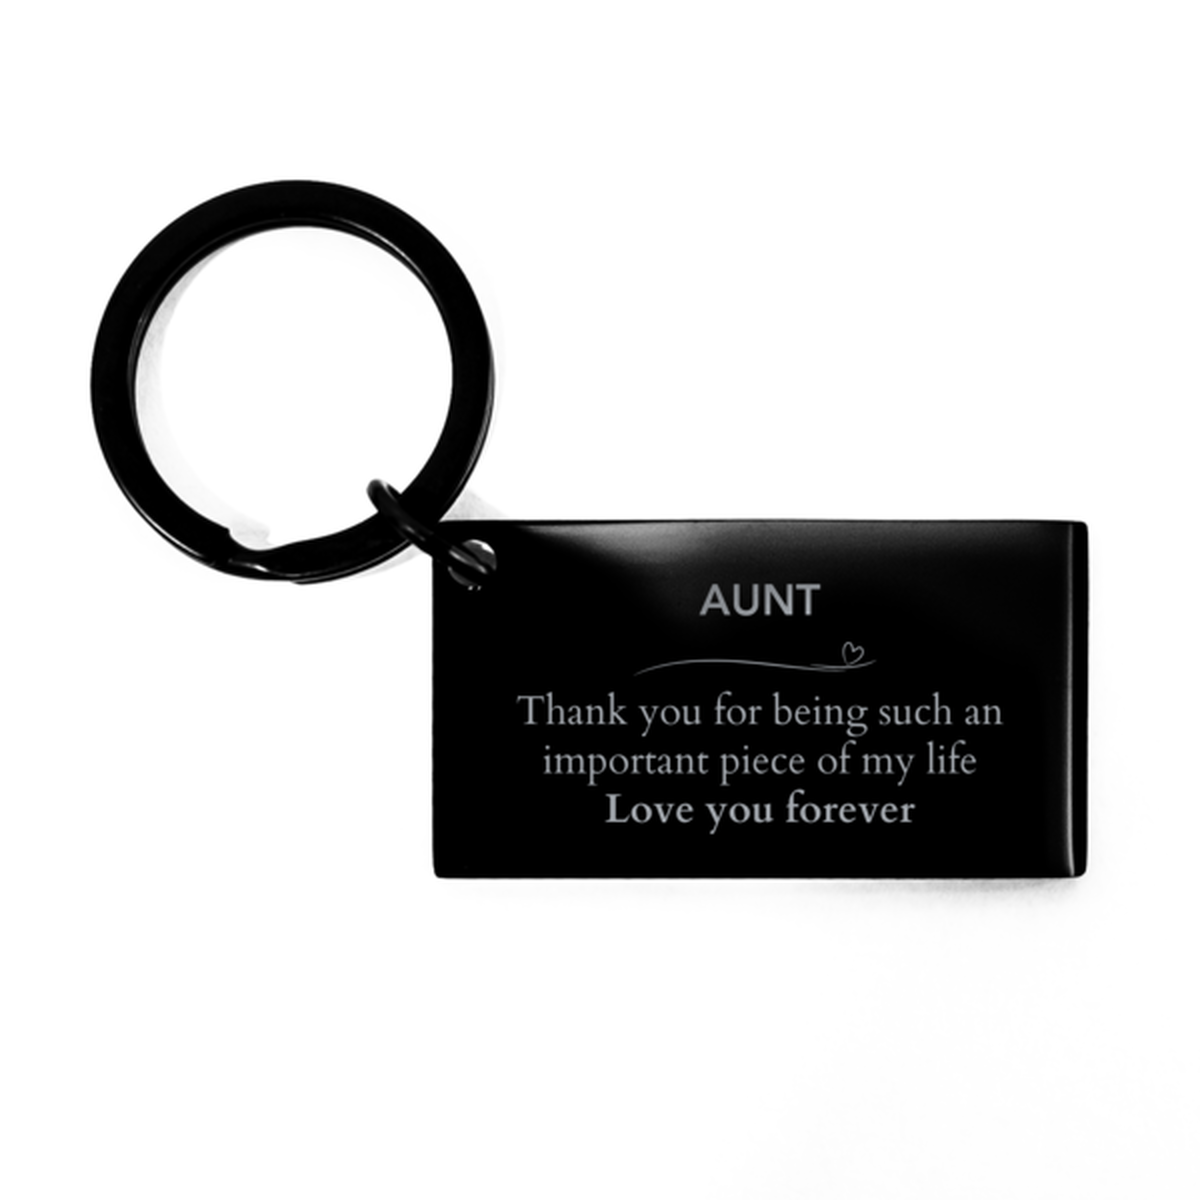 Appropriate Aunt Keychain Epic Birthday Gifts for Aunt Thank you for being such an important piece of my life Aunt Christmas Mothers Fathers Day